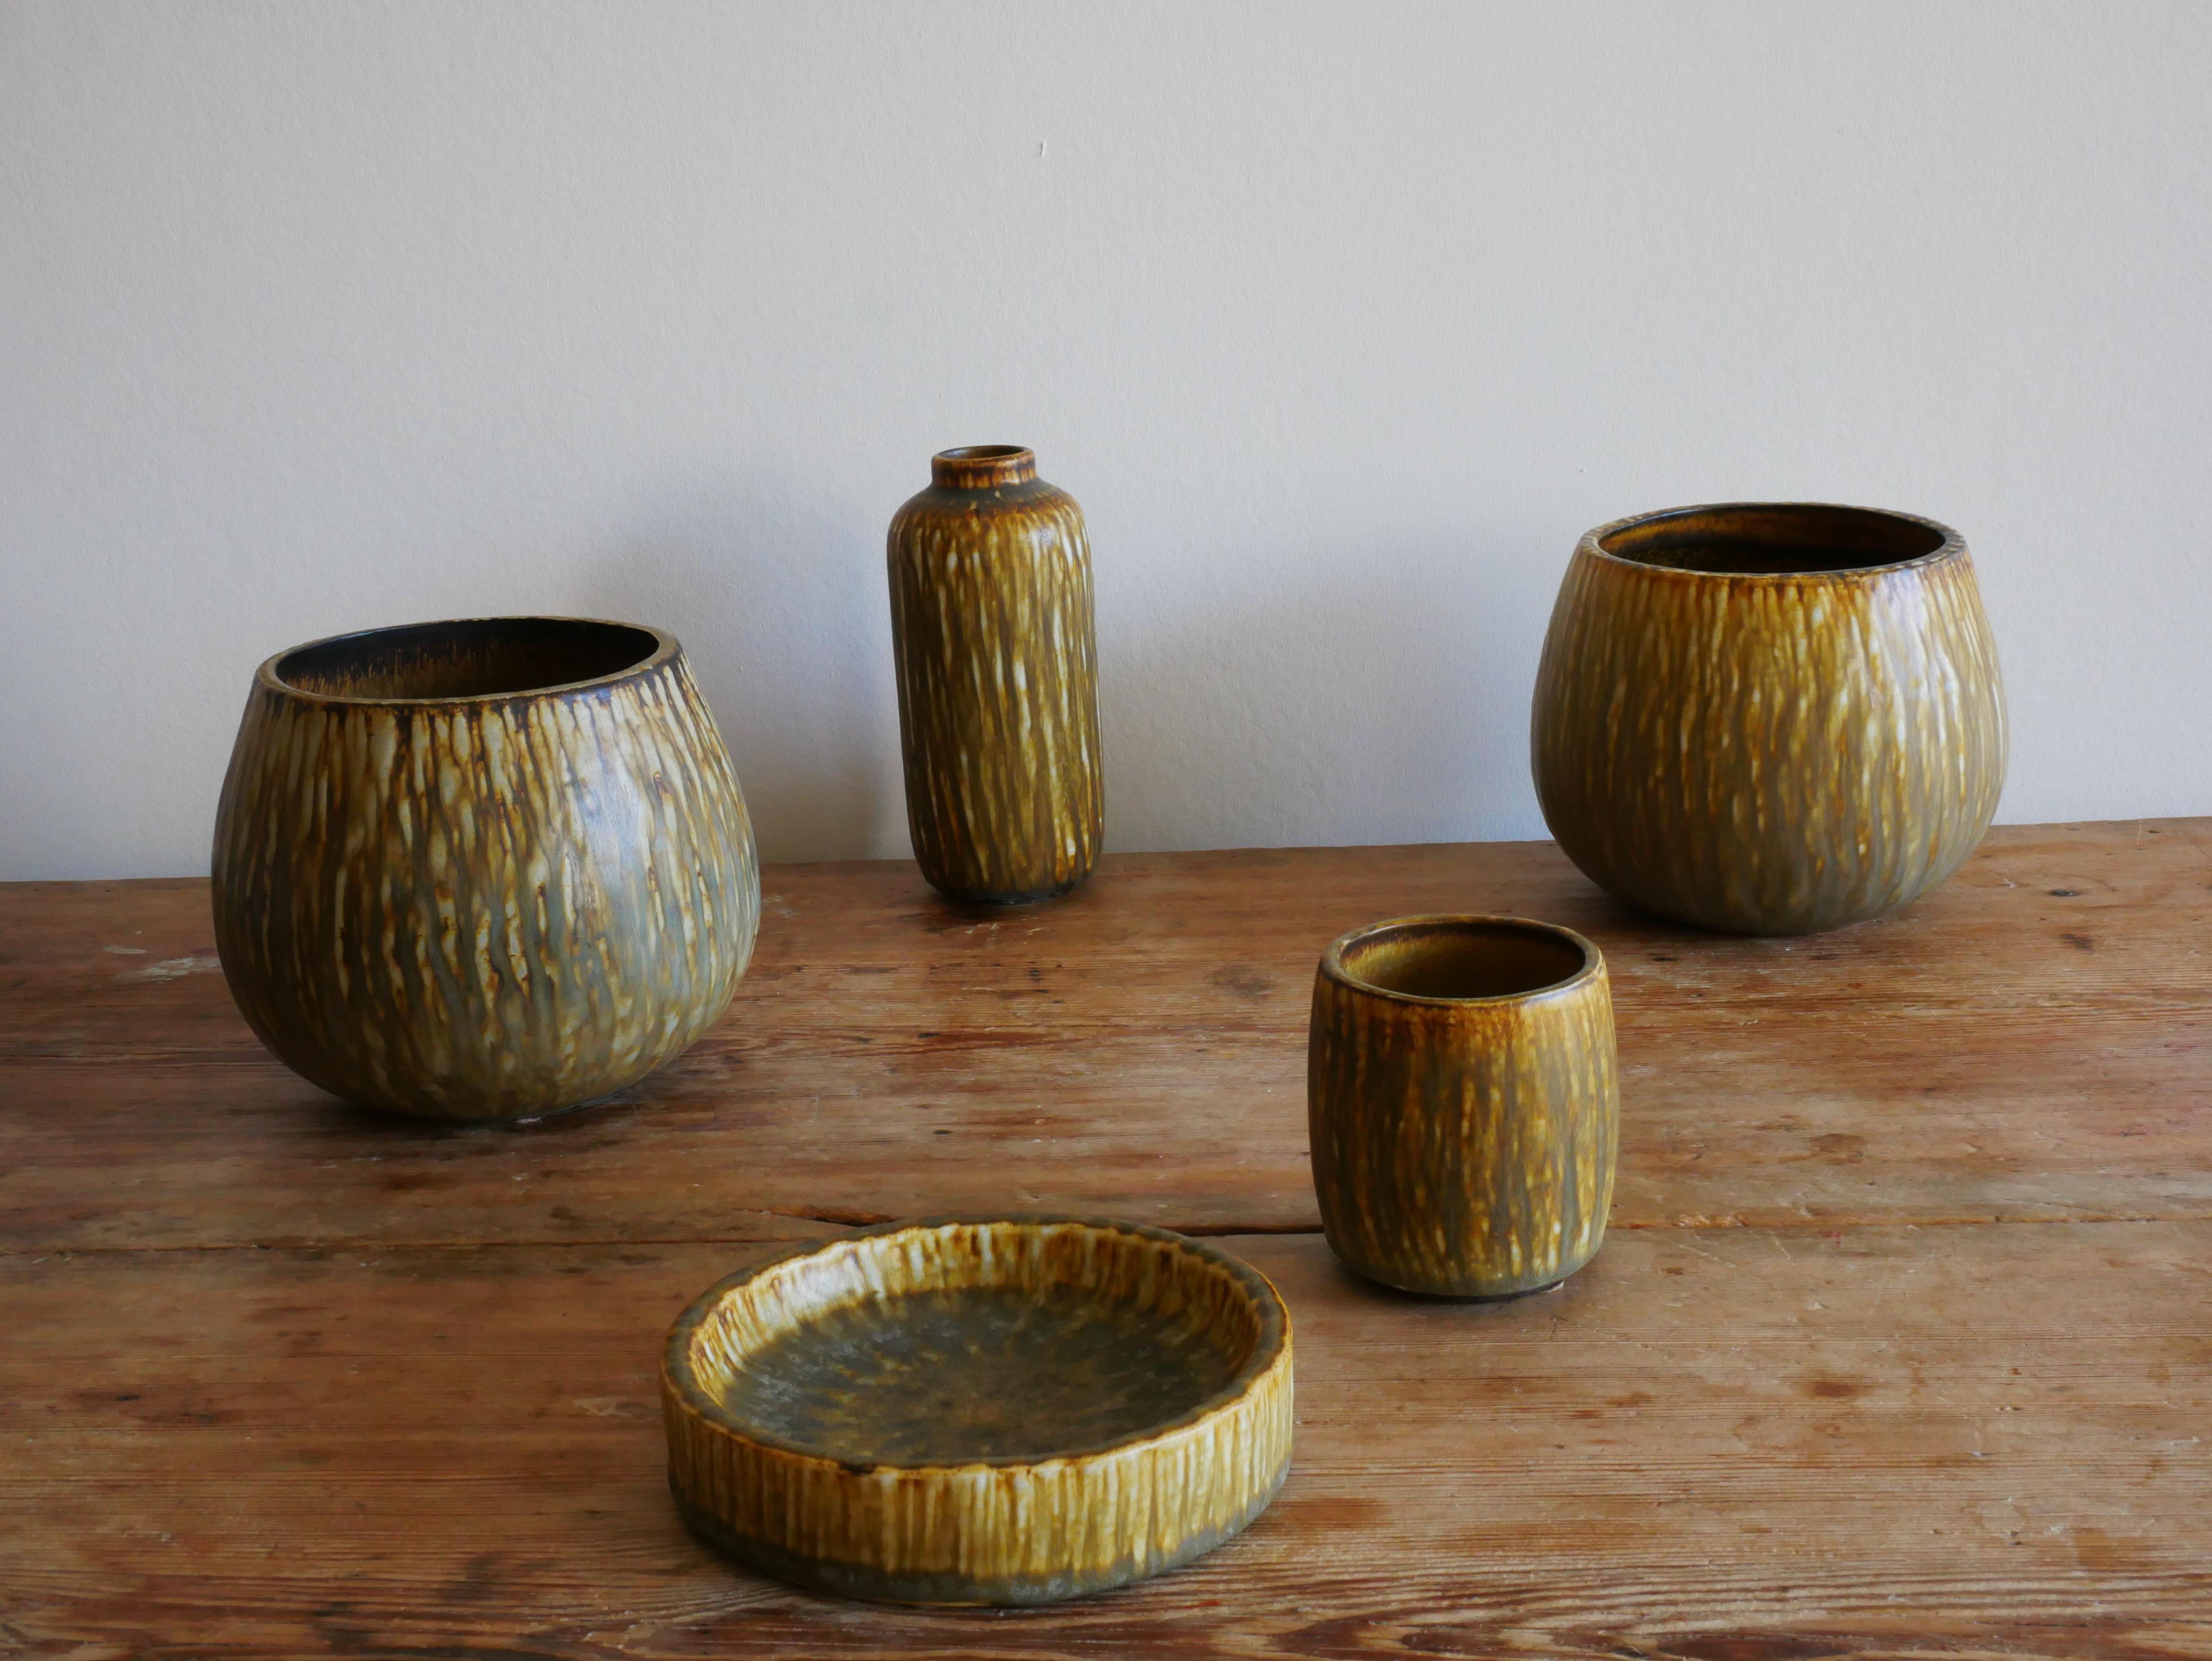 Midcentury Modern Set of 5 Ceramic Pieces, Rubus, Gunnar Nylund, Rörstrand, Sweden.
The pieces are between 3 - 17 cm high. 

The set contains one vase, two bowls, one bowl/tray and one small vase. 
First quality in great condition. 

